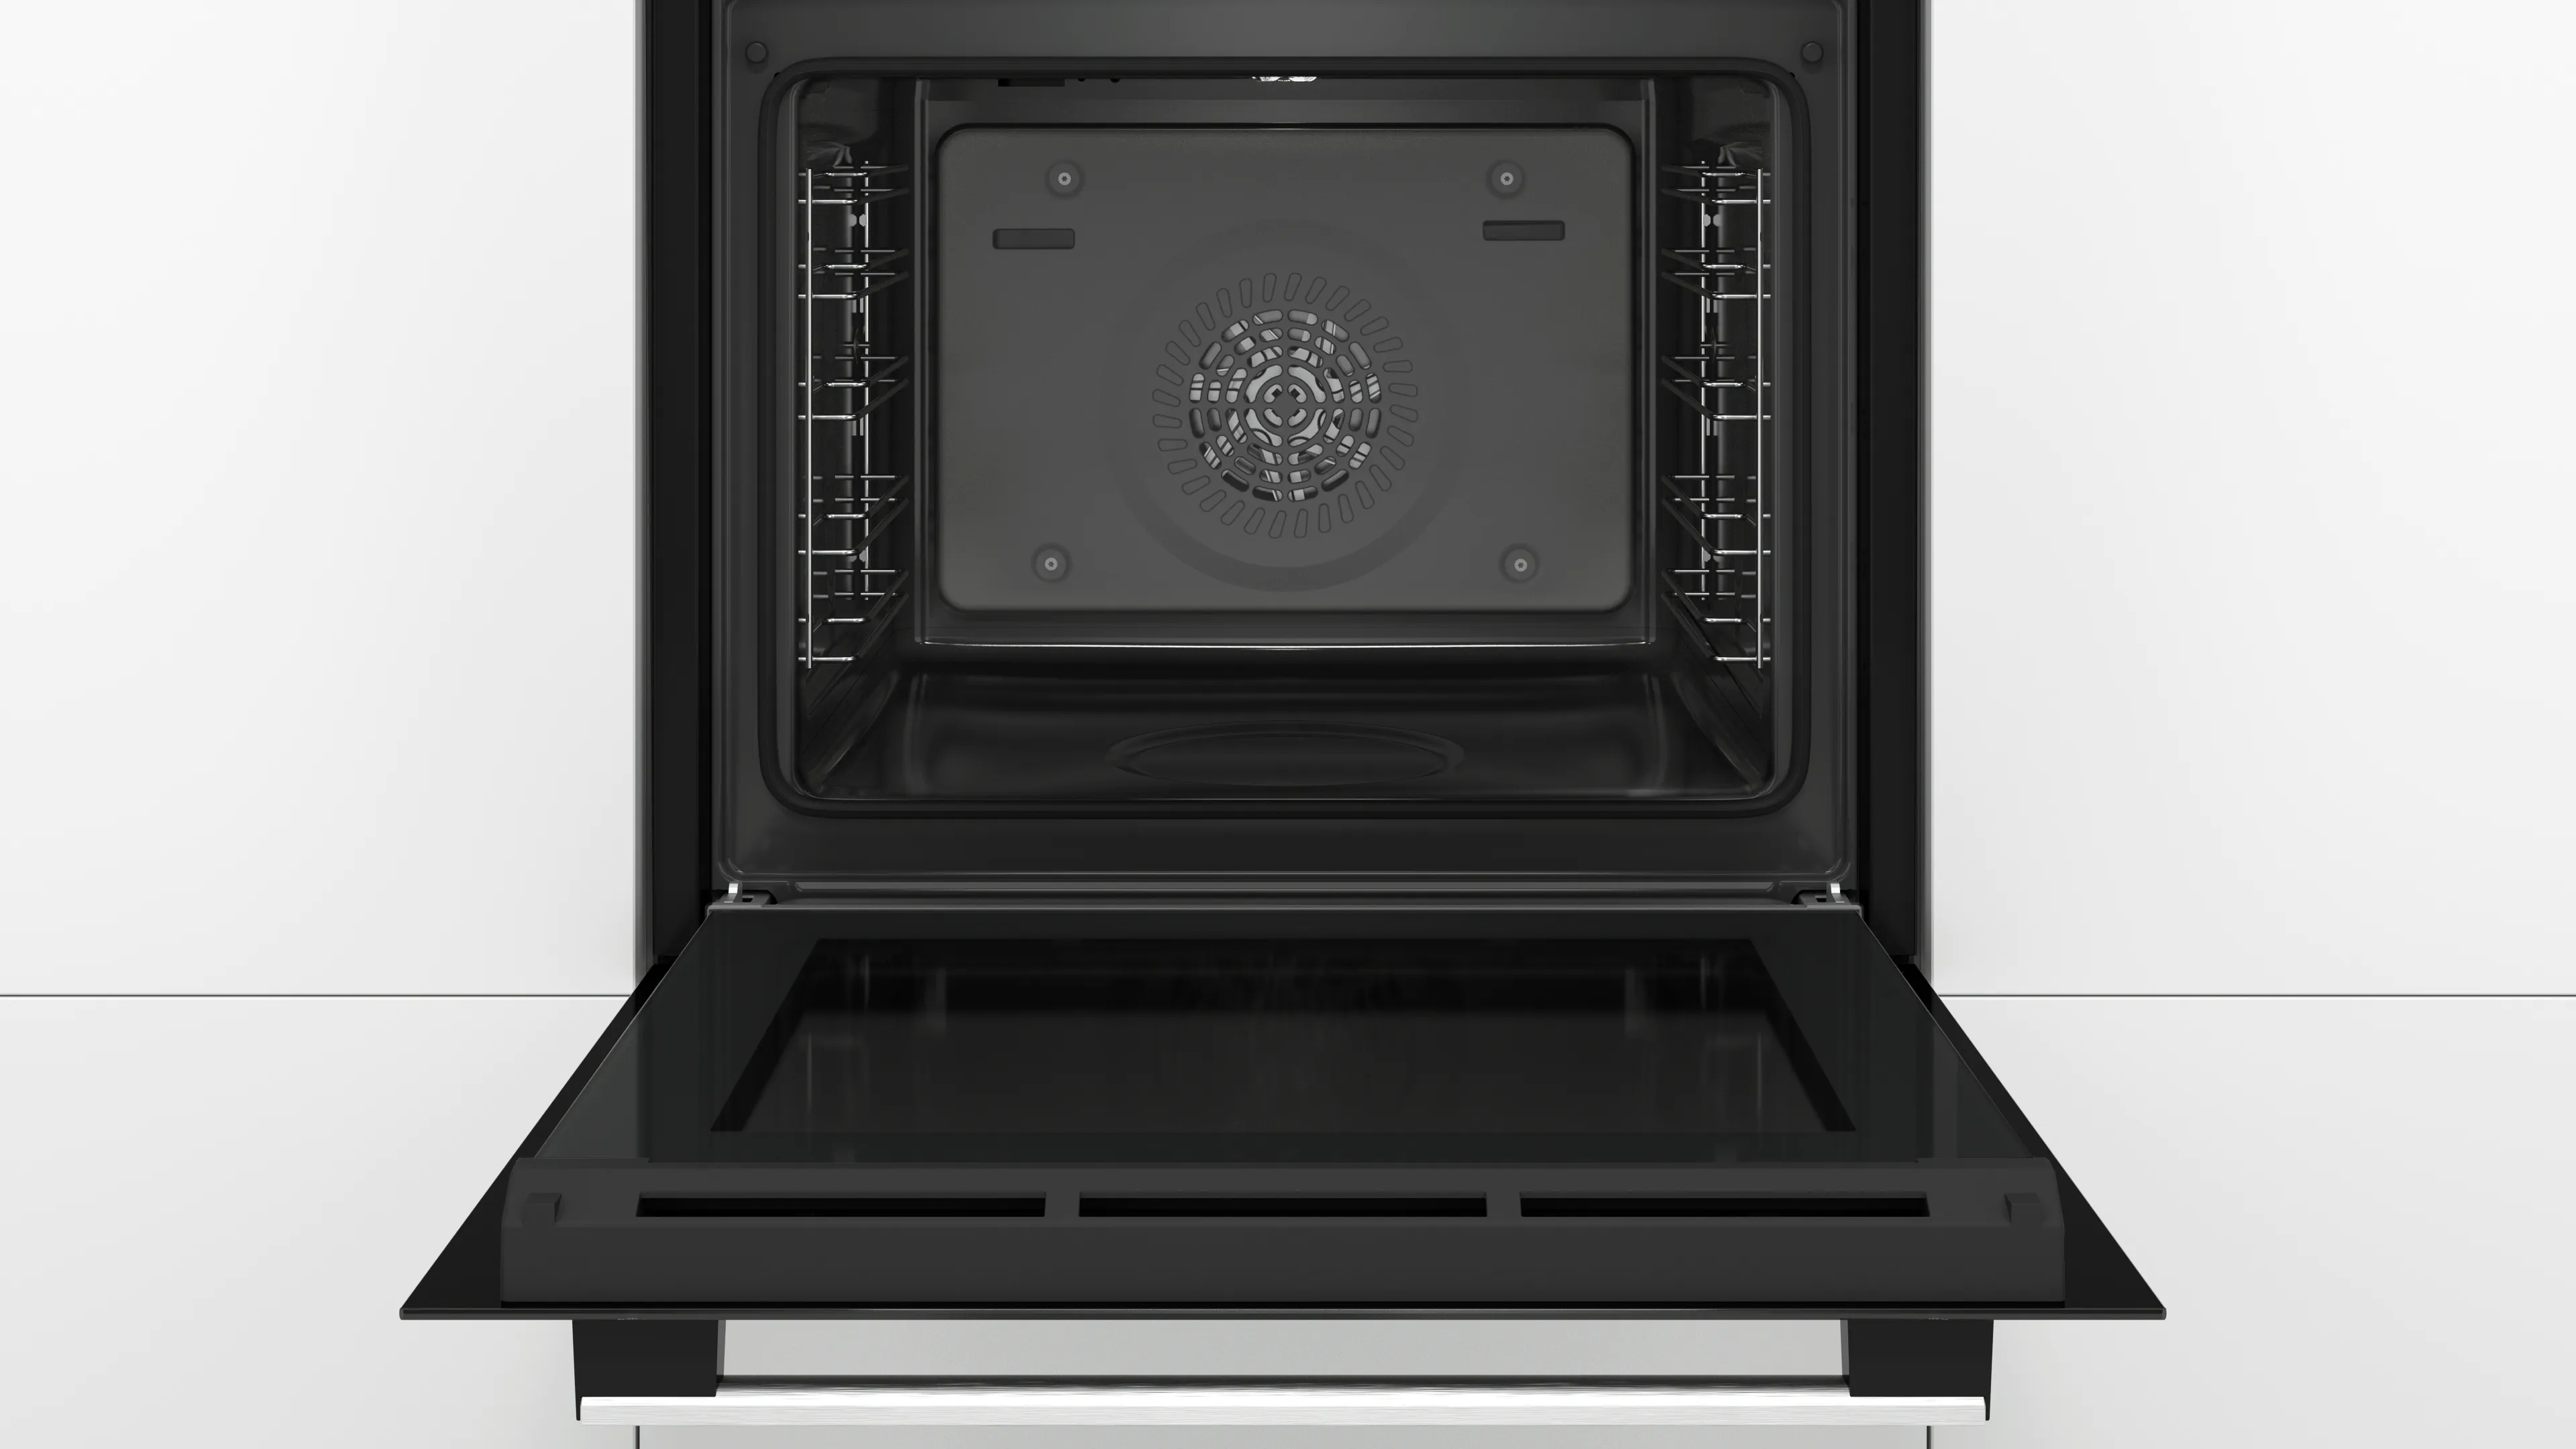 HRS534BS0B Built-in oven with added steam function